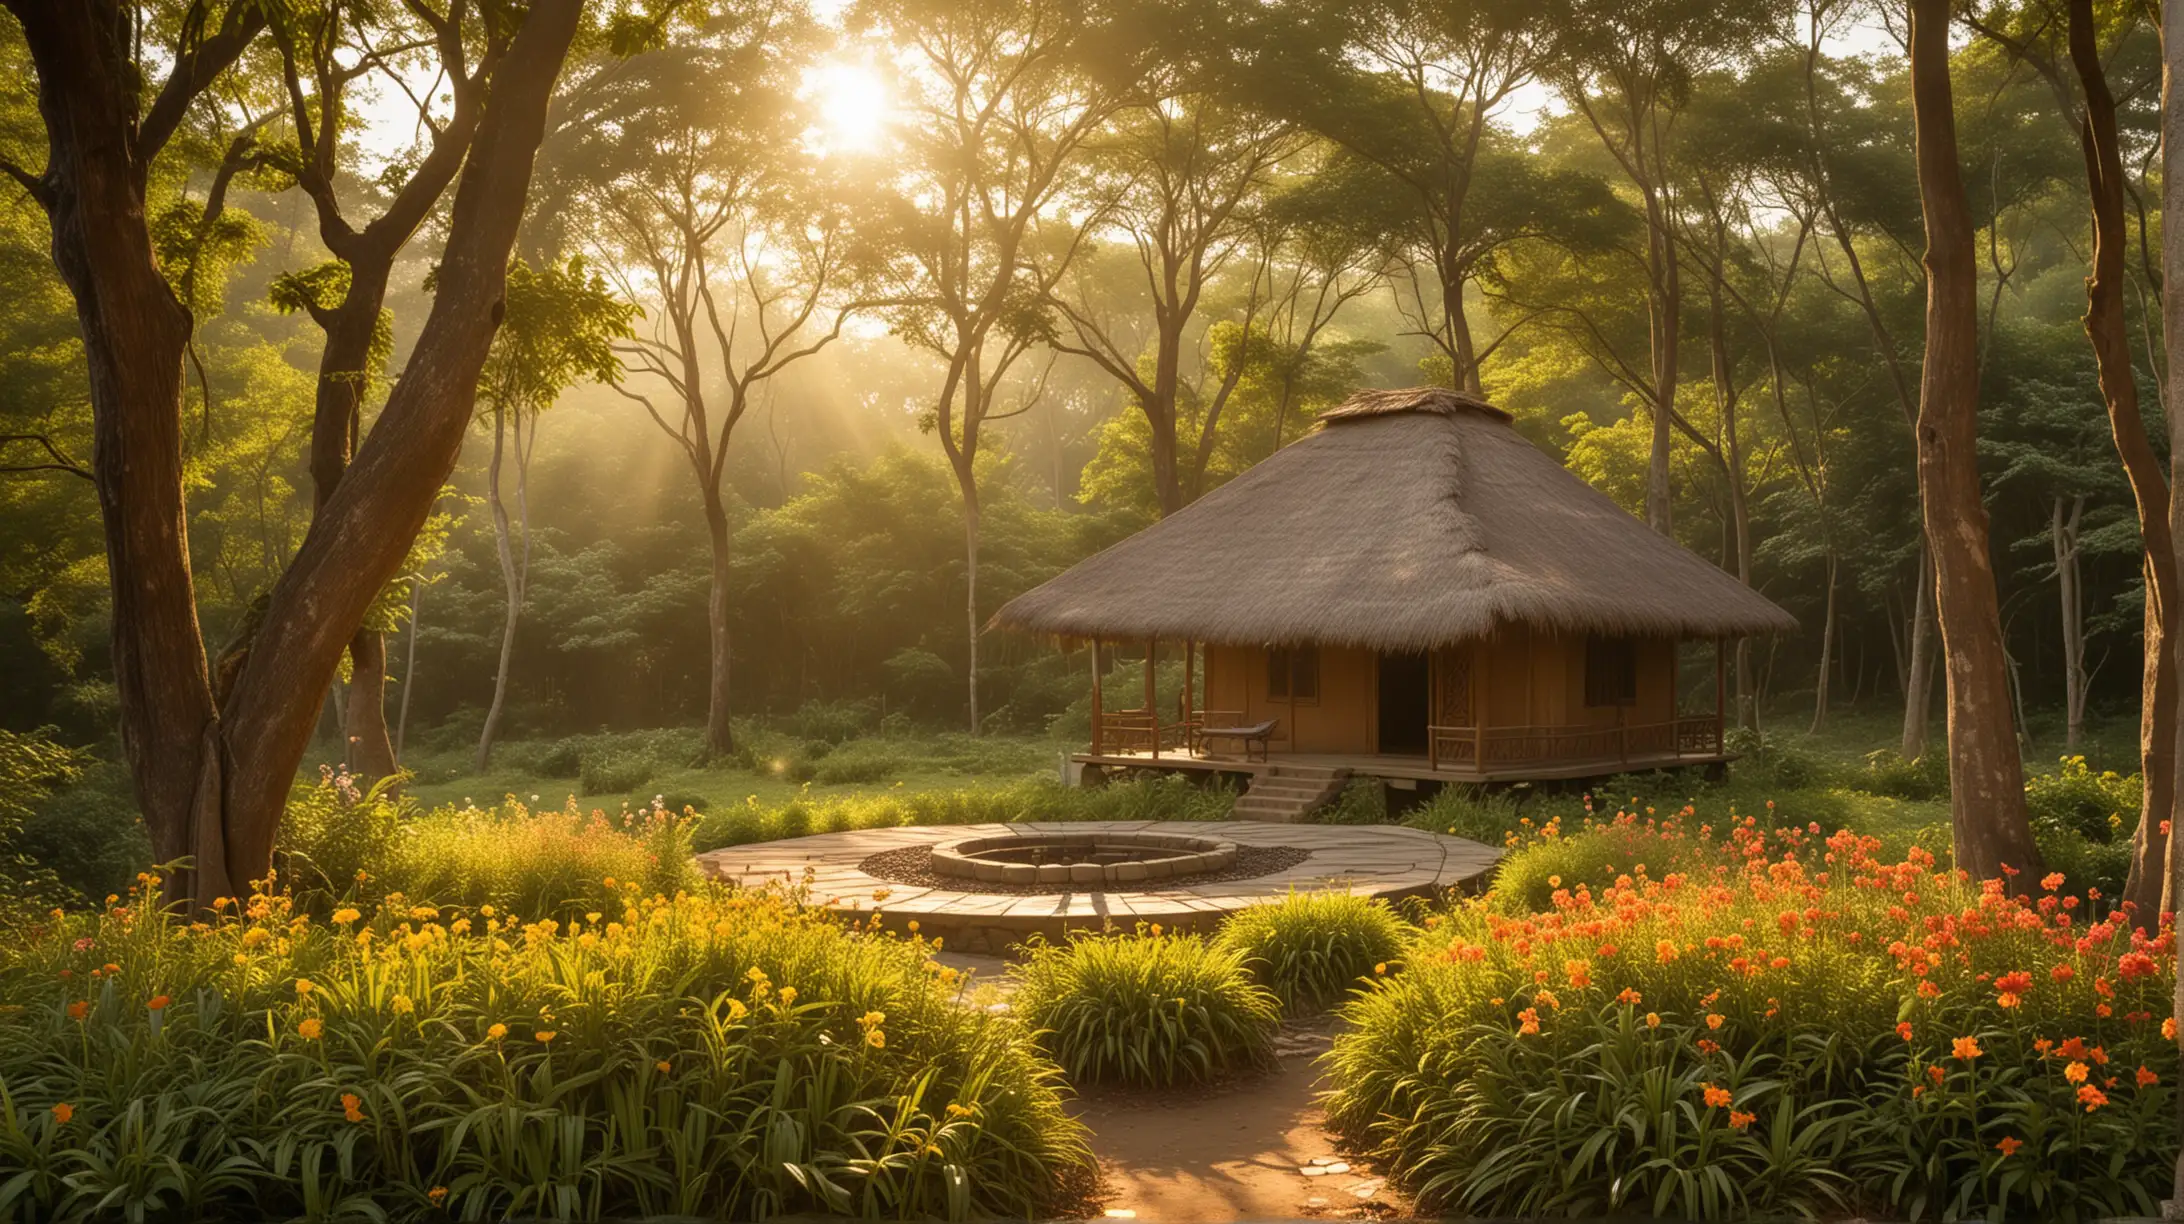 An image of a serene forest clearing, bathed in golden sunlight filtering through the canopy of trees. In the center of the clearing sits a modest yet picturesque ashram, surrounded by lush greenery and colorful flowers. The ashram is constructed of natural materials like wood and thatch, with intricate carvings adorning its facade. Smoke gently rises from a small fire pit nearby, where a group of disciples gathers for morning prayers and meditation.  Birds chirp melodiously, and the sound of a nearby stream adds to the tranquil atmosphere of the ashram.  There is also a beautiful hut